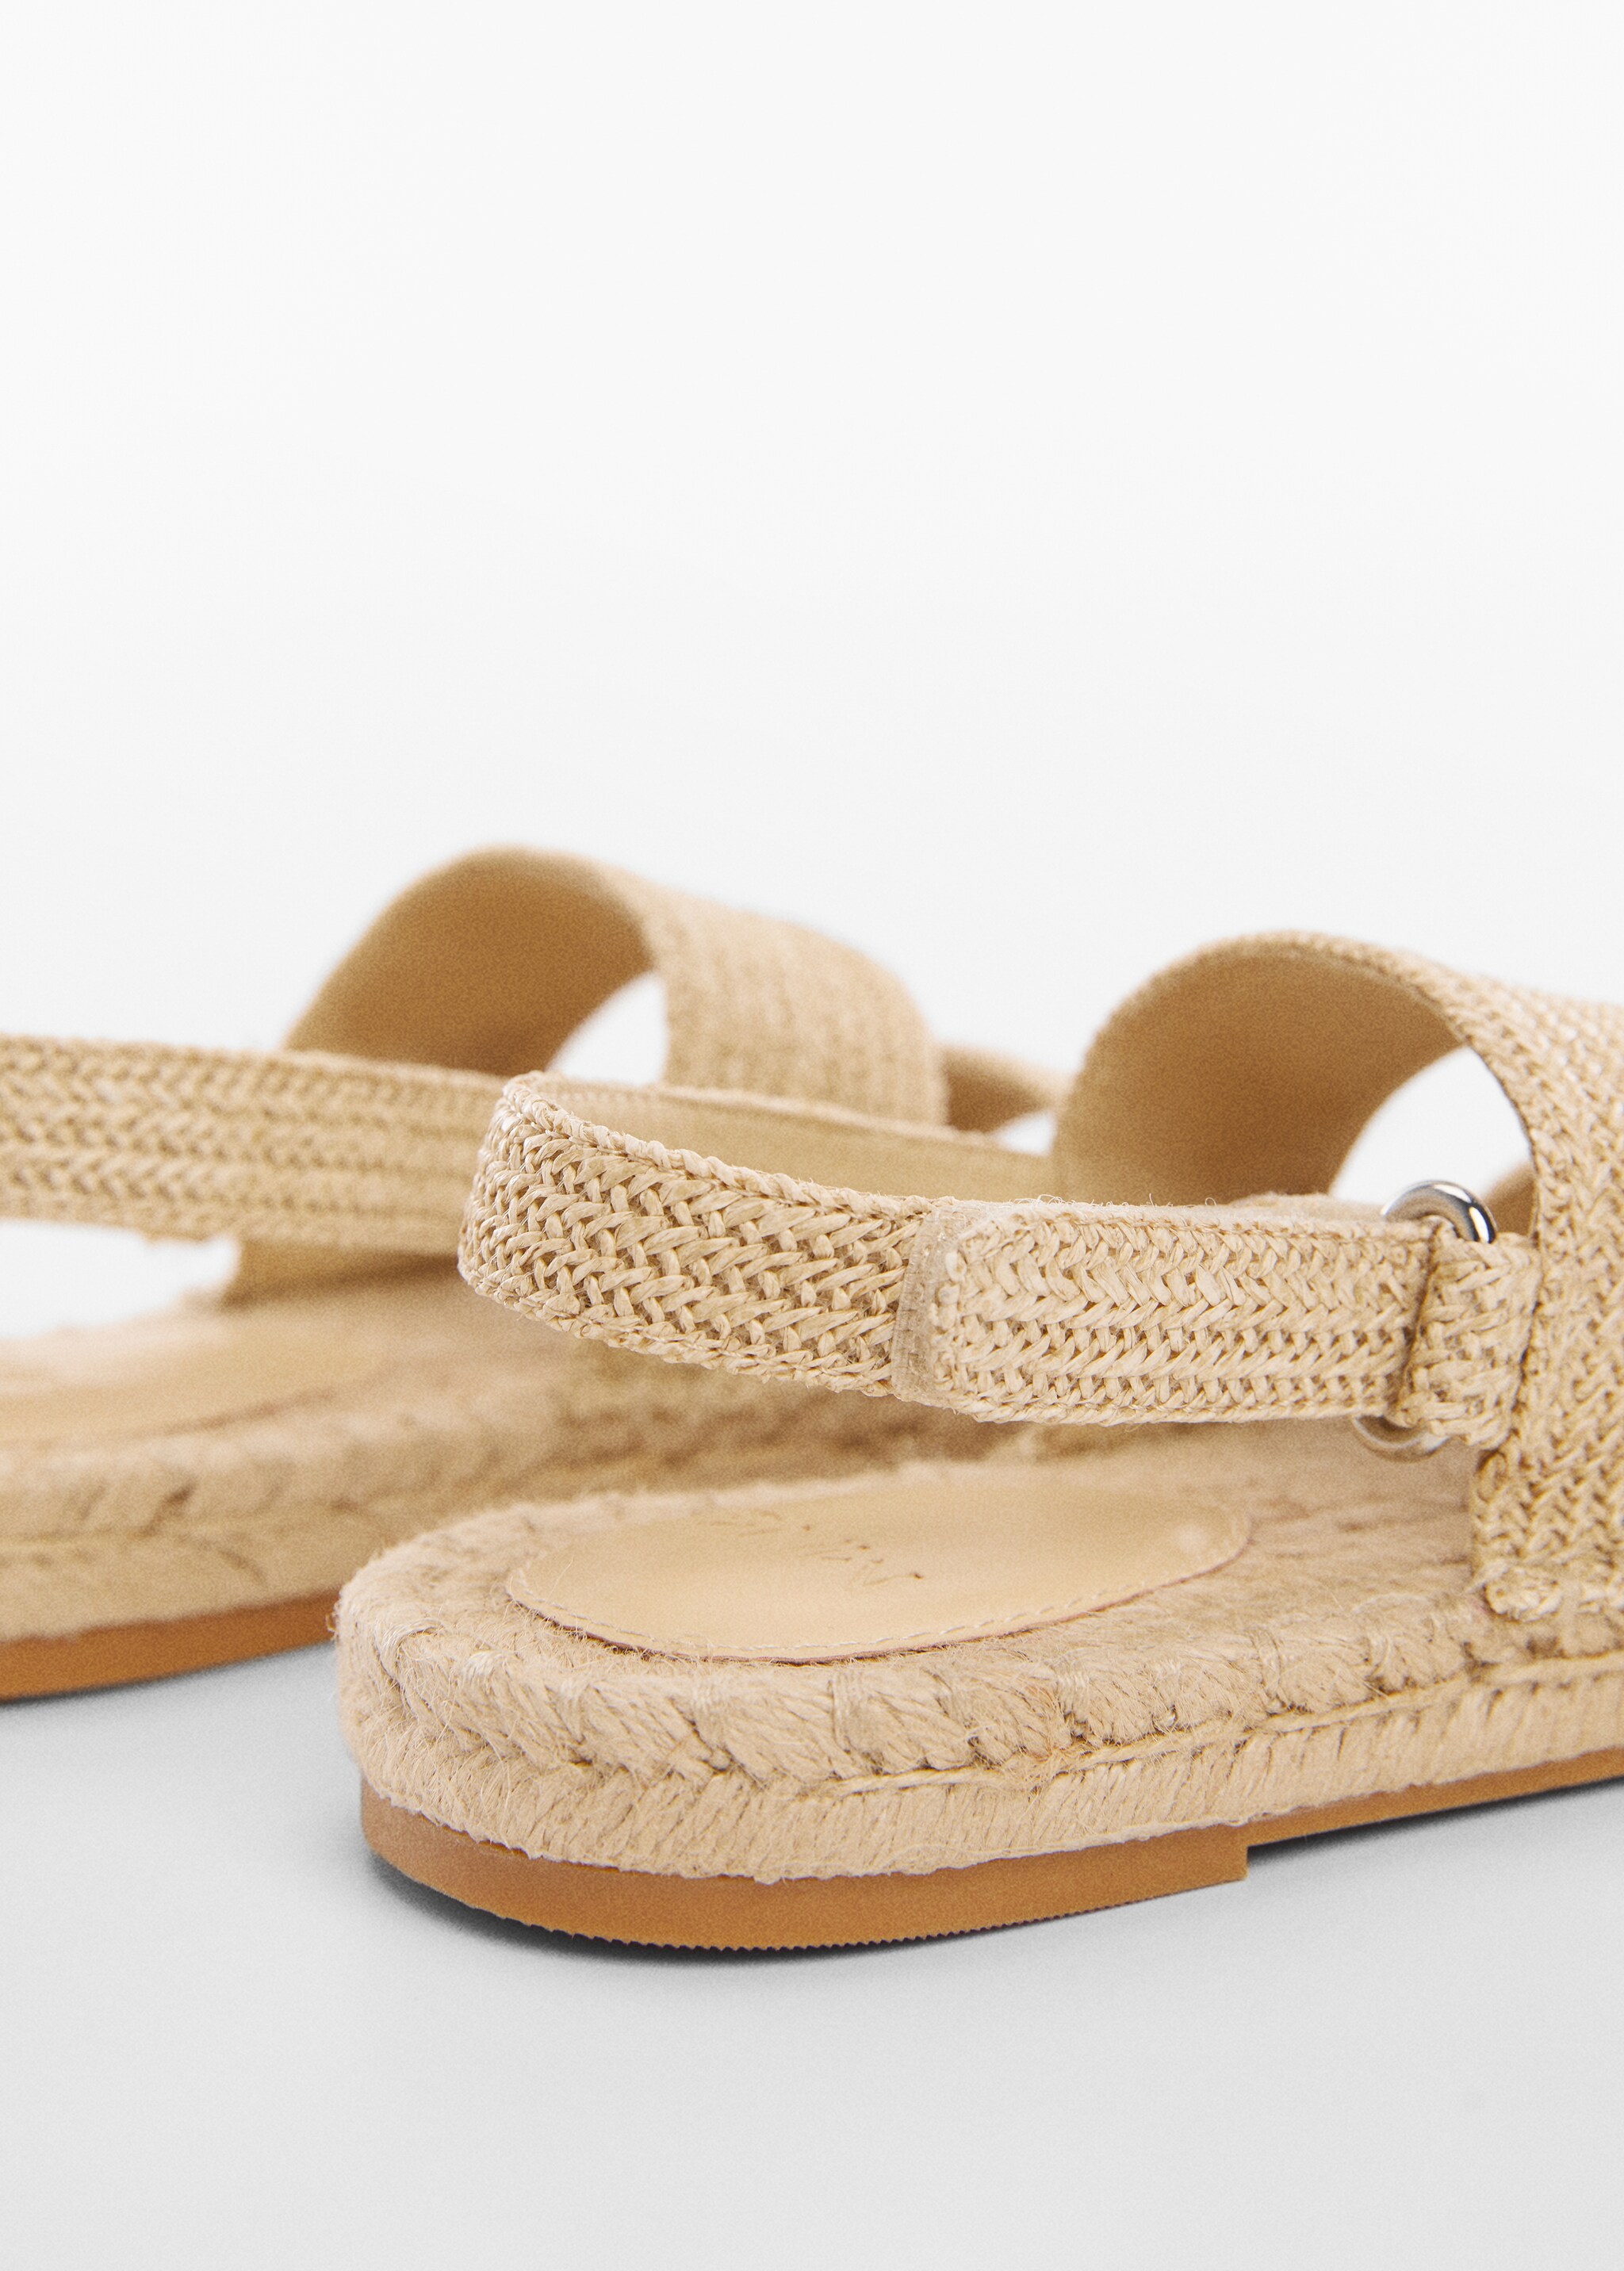 Velcro strap sandal - Details of the article 1